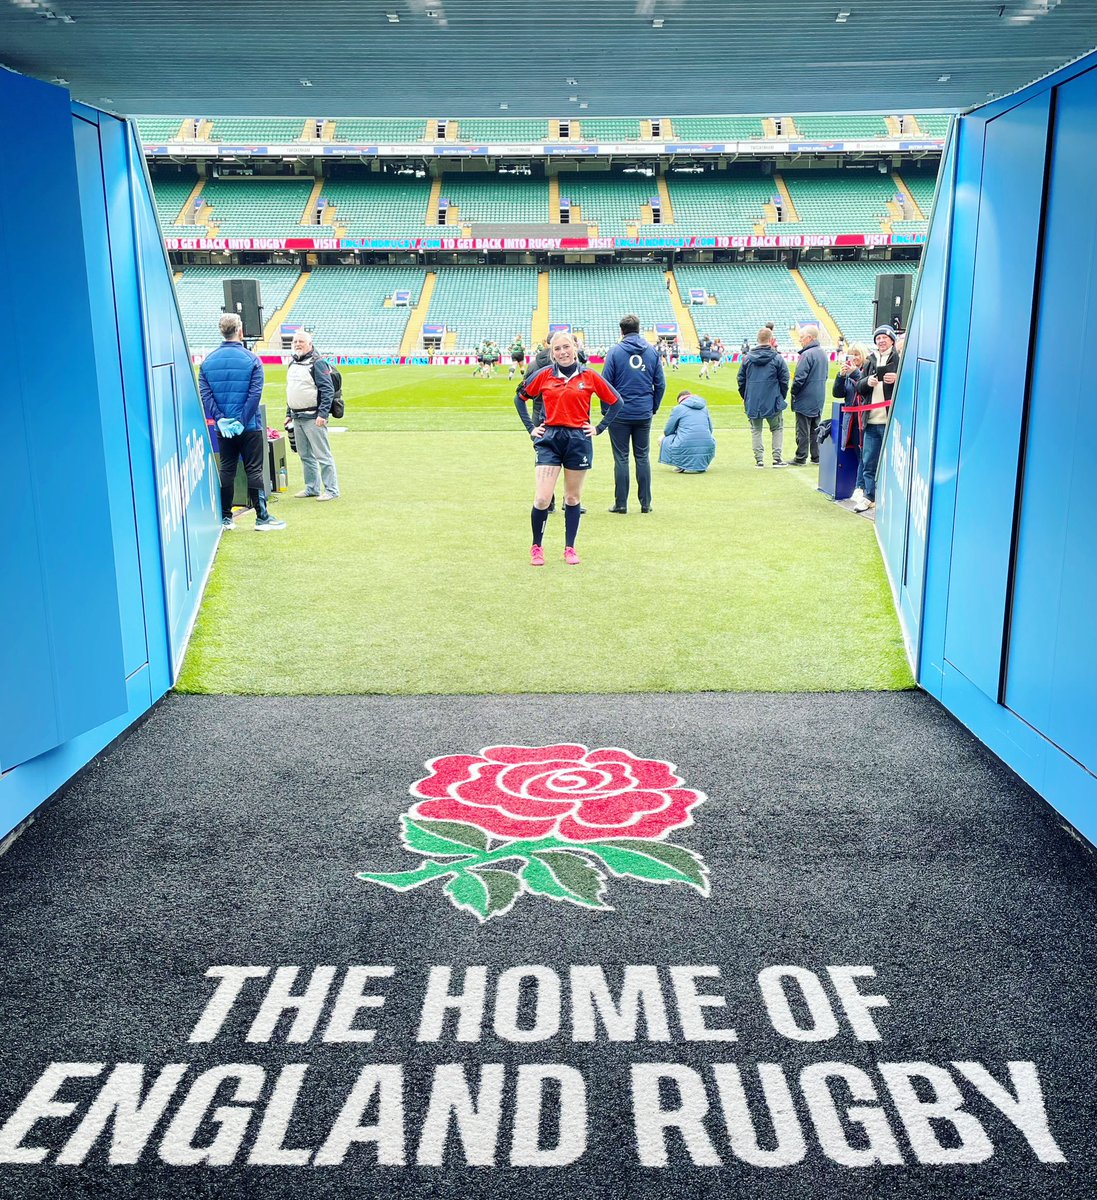 Yesterday it was the stoop tunnel, today it’s twickenham 🤩